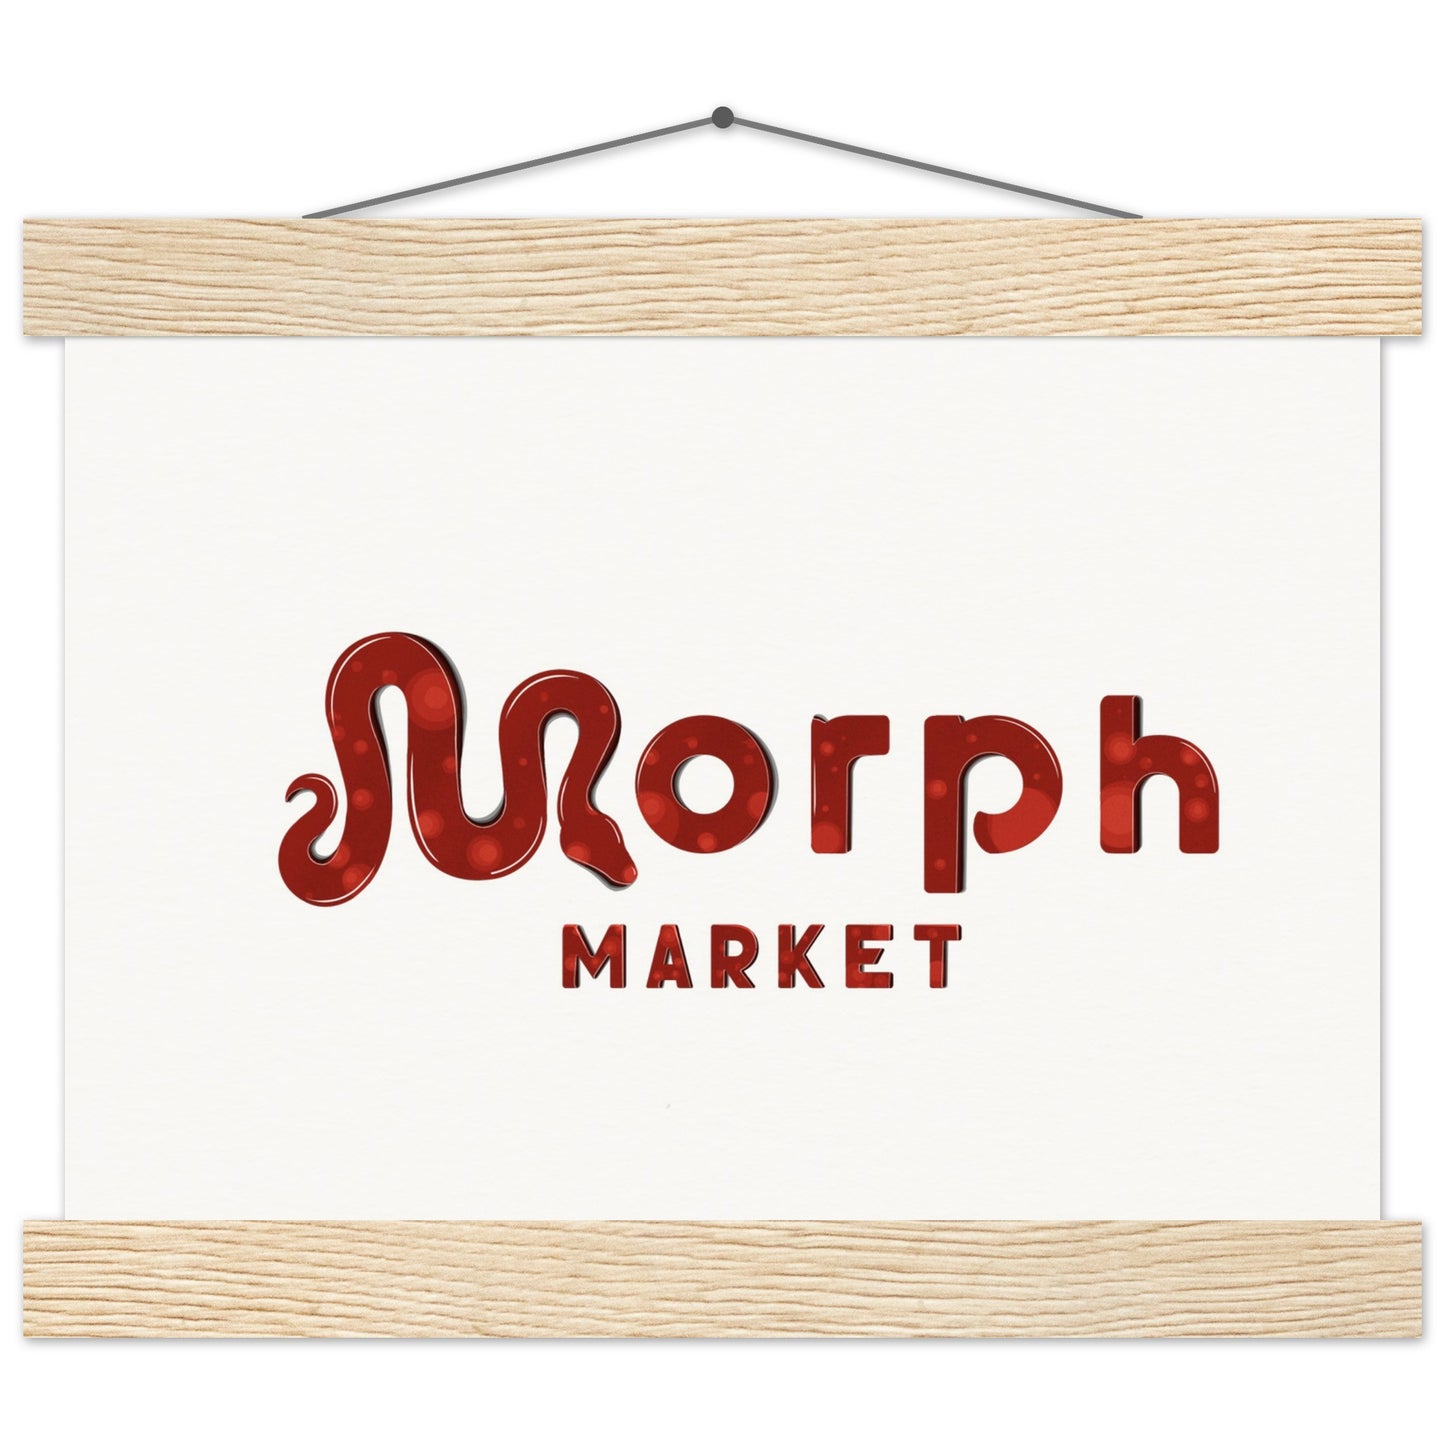 Morph Market (Red Circles) - Museum-Quality Matte Paper Poster with Hanger